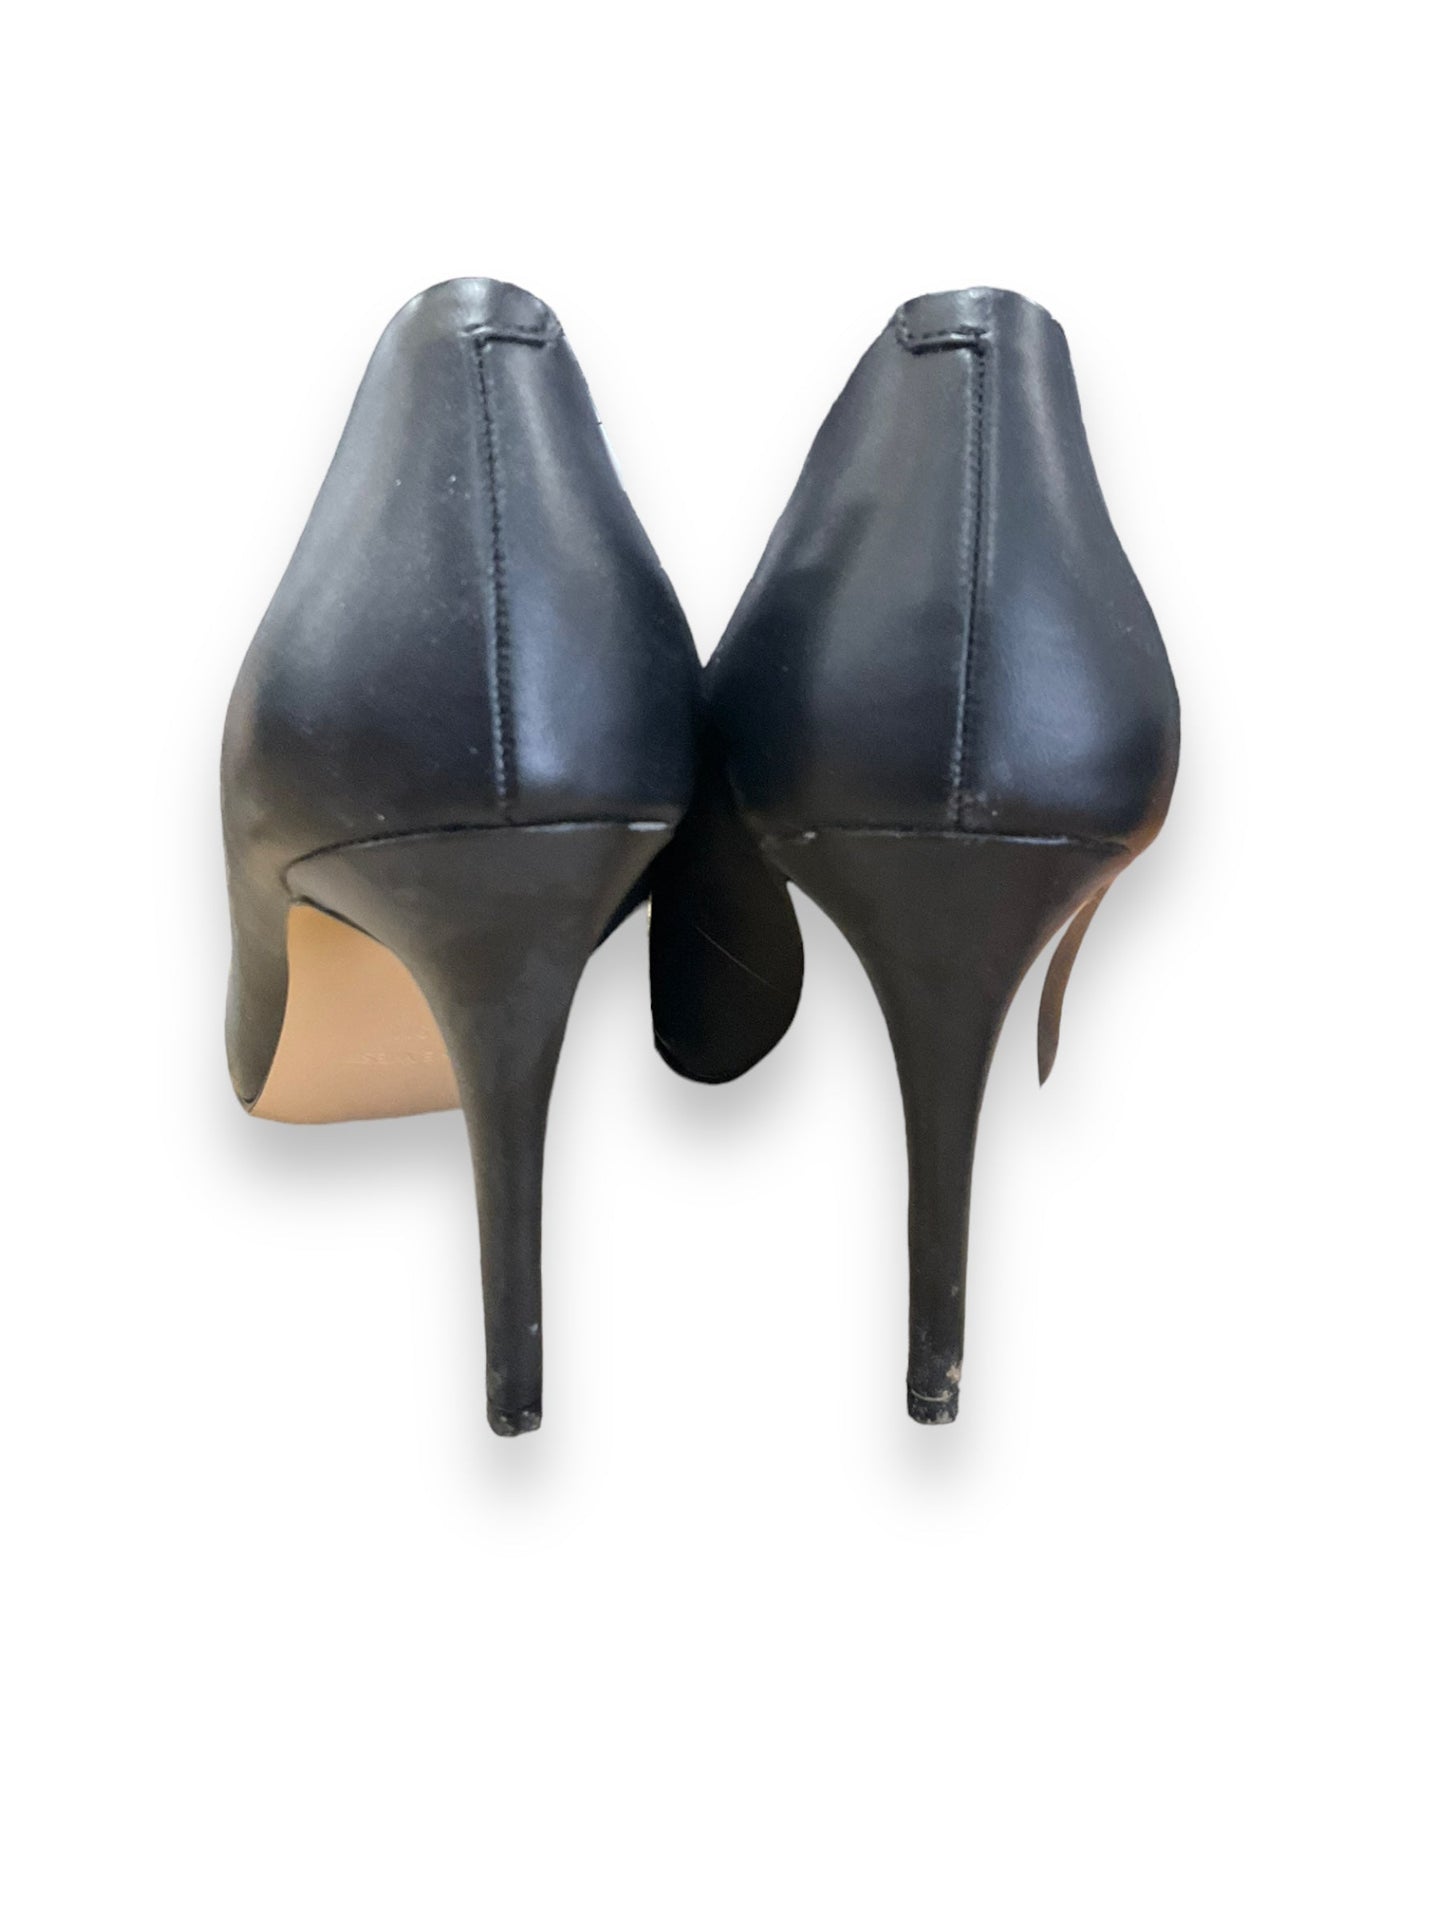 Shoes Heels Stiletto By Nine West  Size: 9